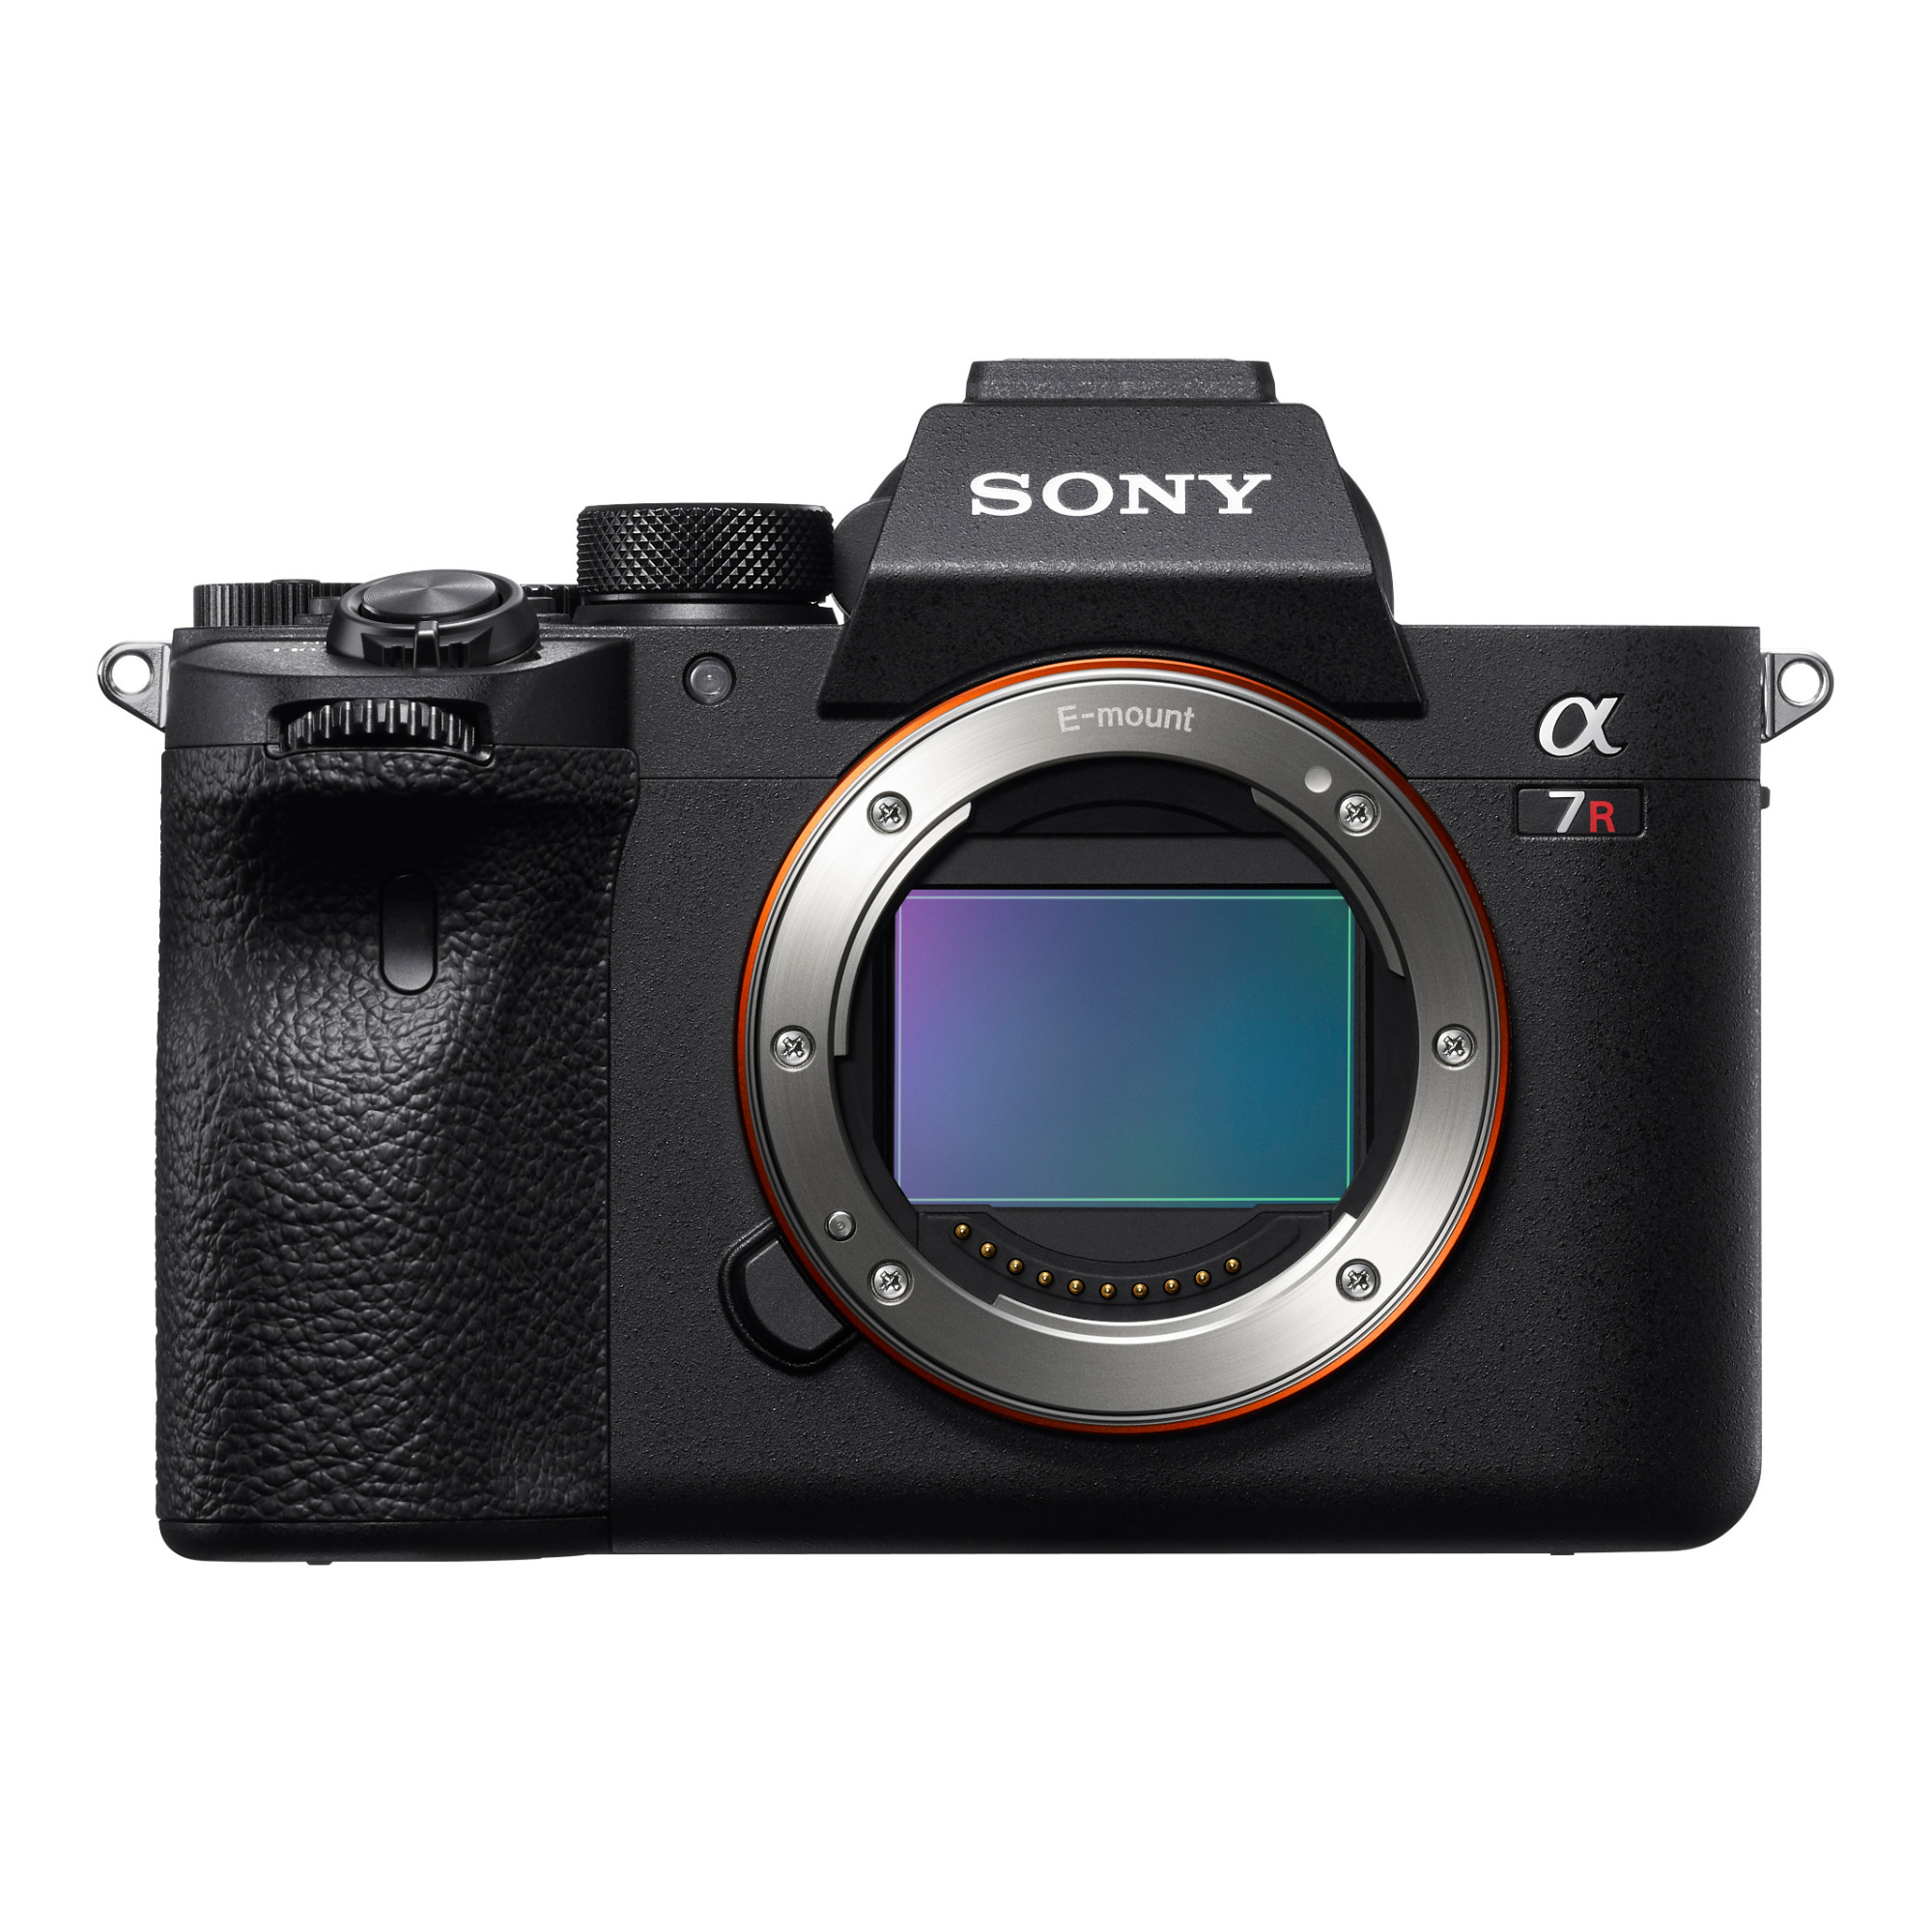 Sony a7R IV ILCE-7RM4 - Digital camera - mirrorless - 61 MP - 4K / 30 fps - body only - NFC, Wi-Fi, Bluetooth - black - image 1 of 22